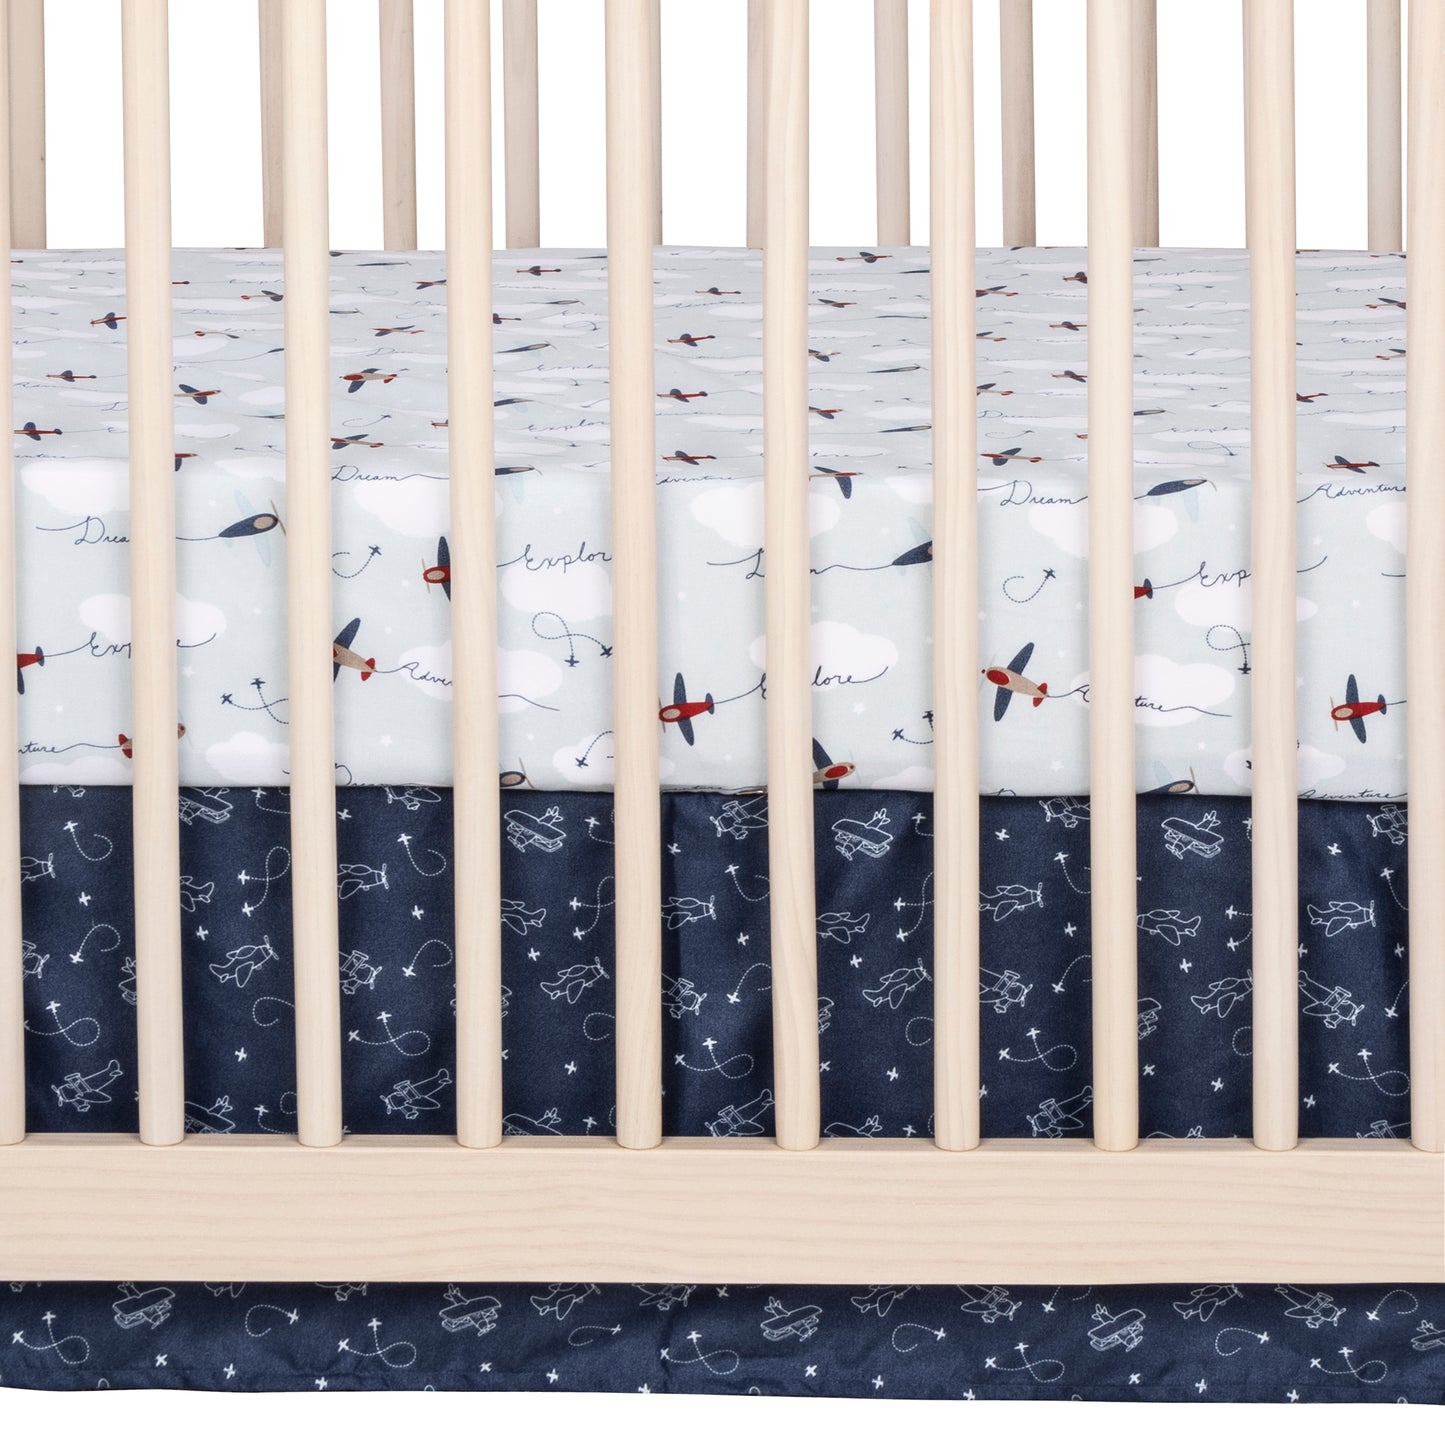 Air Travel 3 Piece Crib Bedding Set by Sammy & Lou® - zoomed in view of crib sheet and crib skirt on a crib